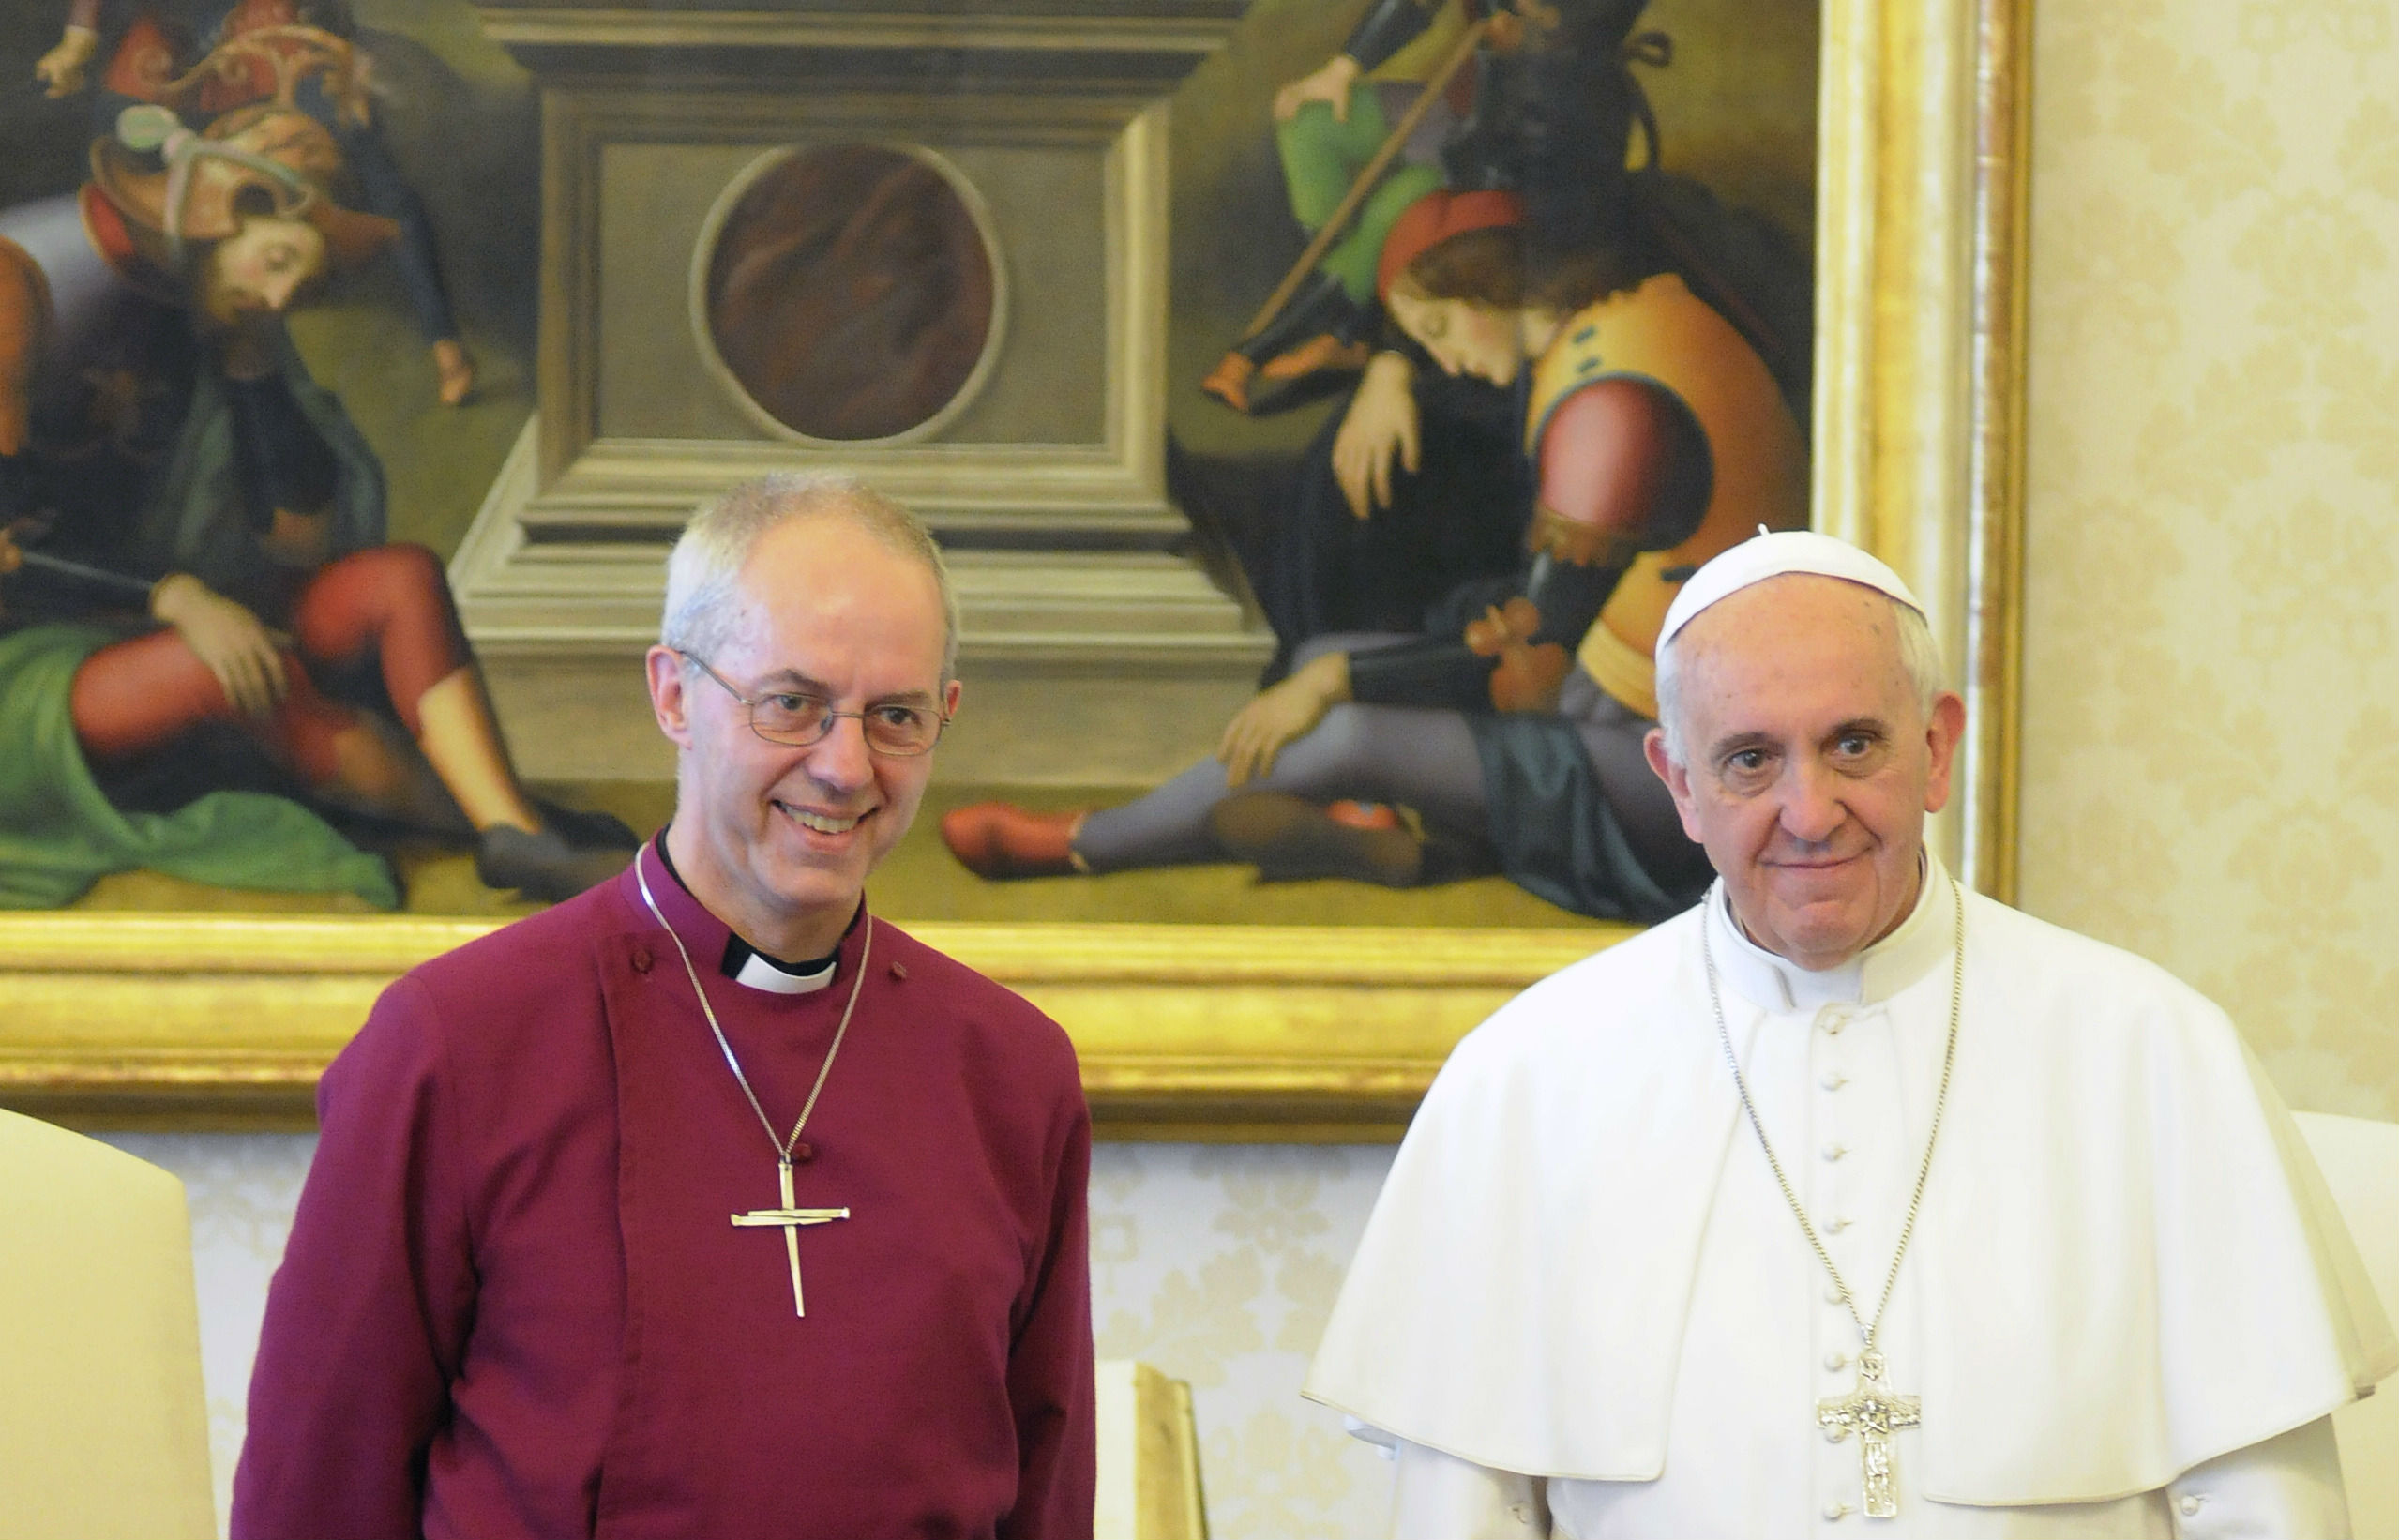 Pope's impact has reached 'far beyond Rome' says Welby at private Vatican meeting